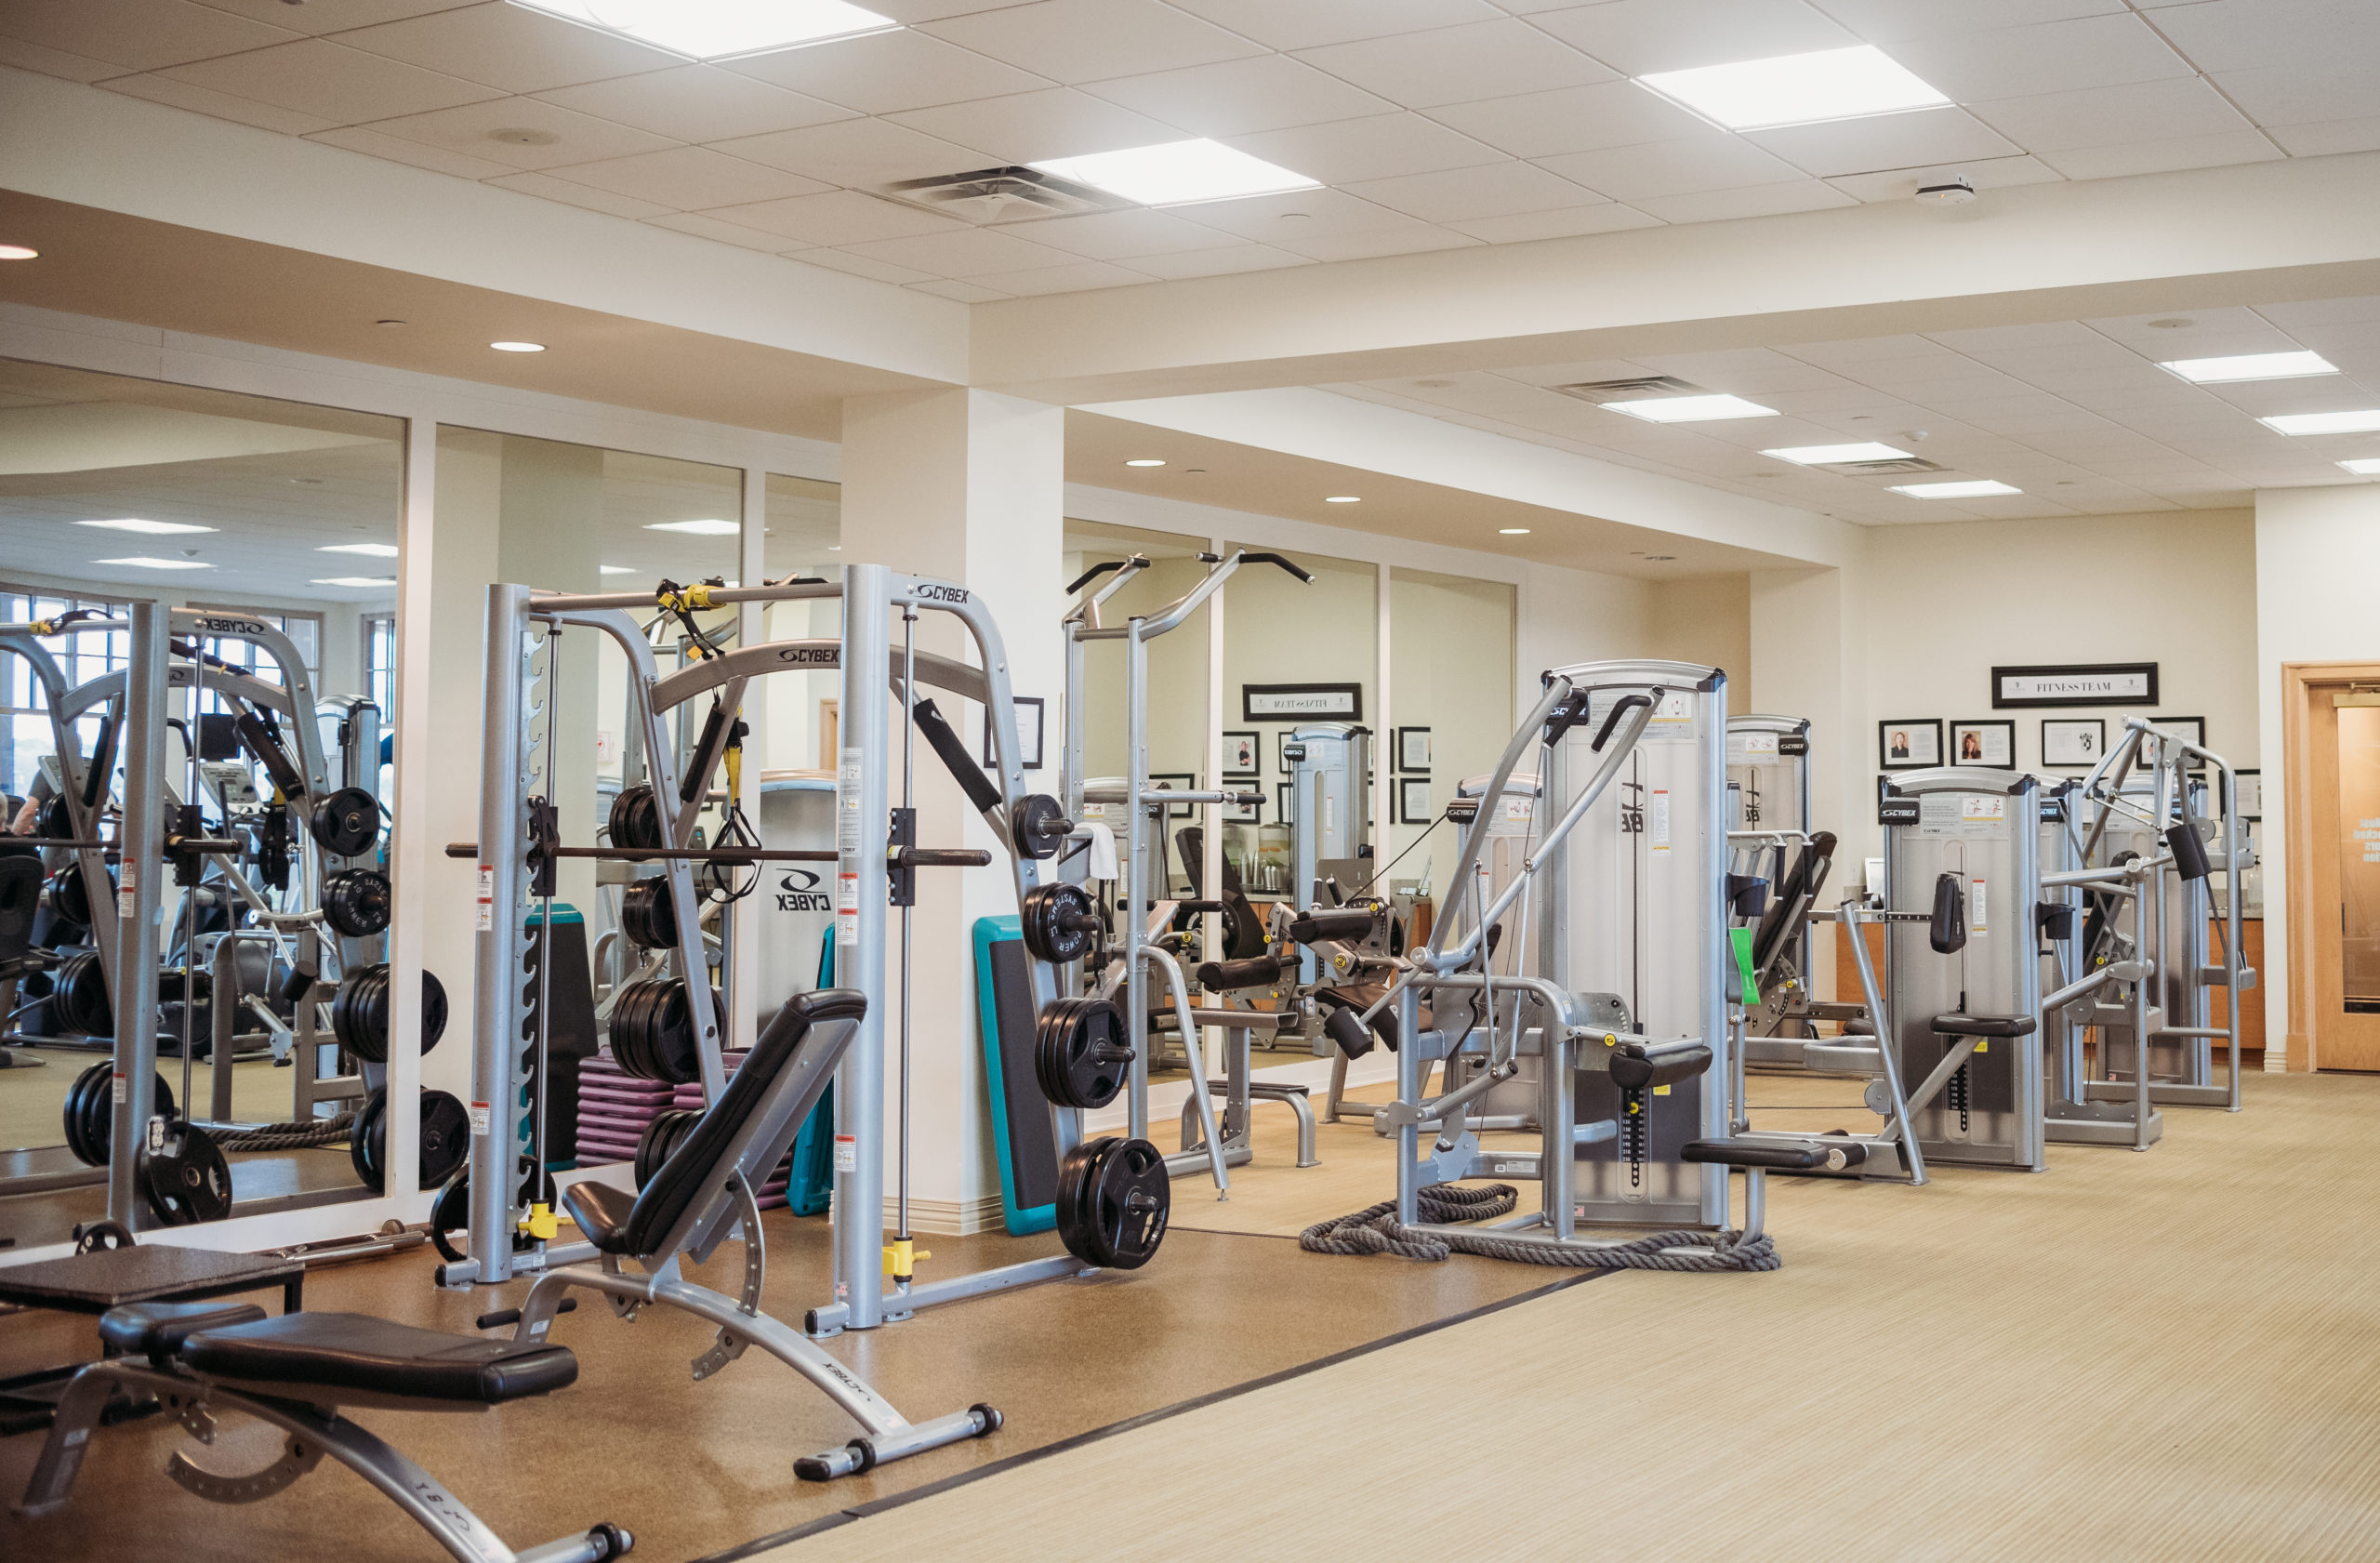 Luxury gym equipment provided for residents of condos at the Corvalla